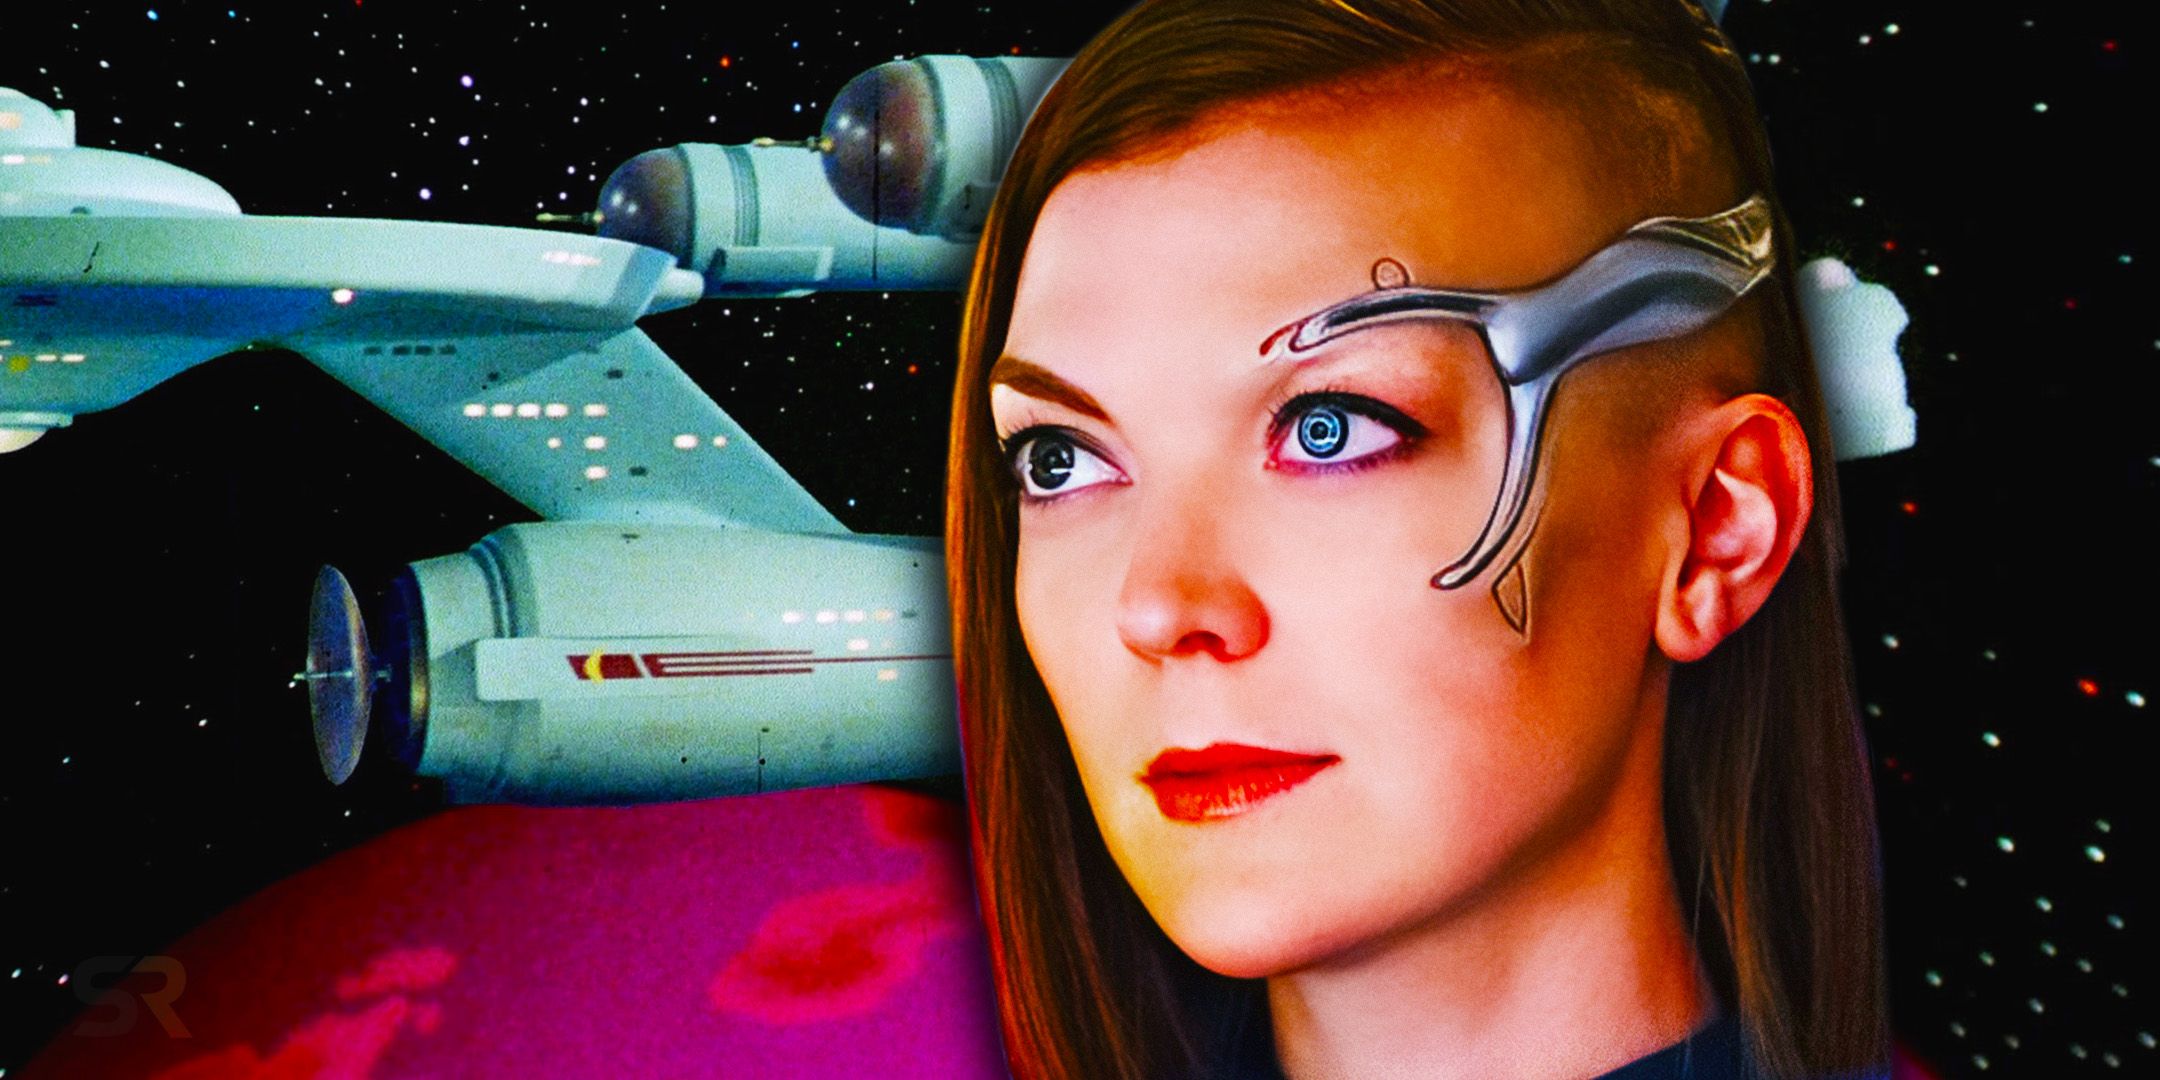 Keyla Detmer from Star Trek: Discovery stands looking off to the side with the USS Enterprise from Star Trek: TOS orbiting a planet in the background.